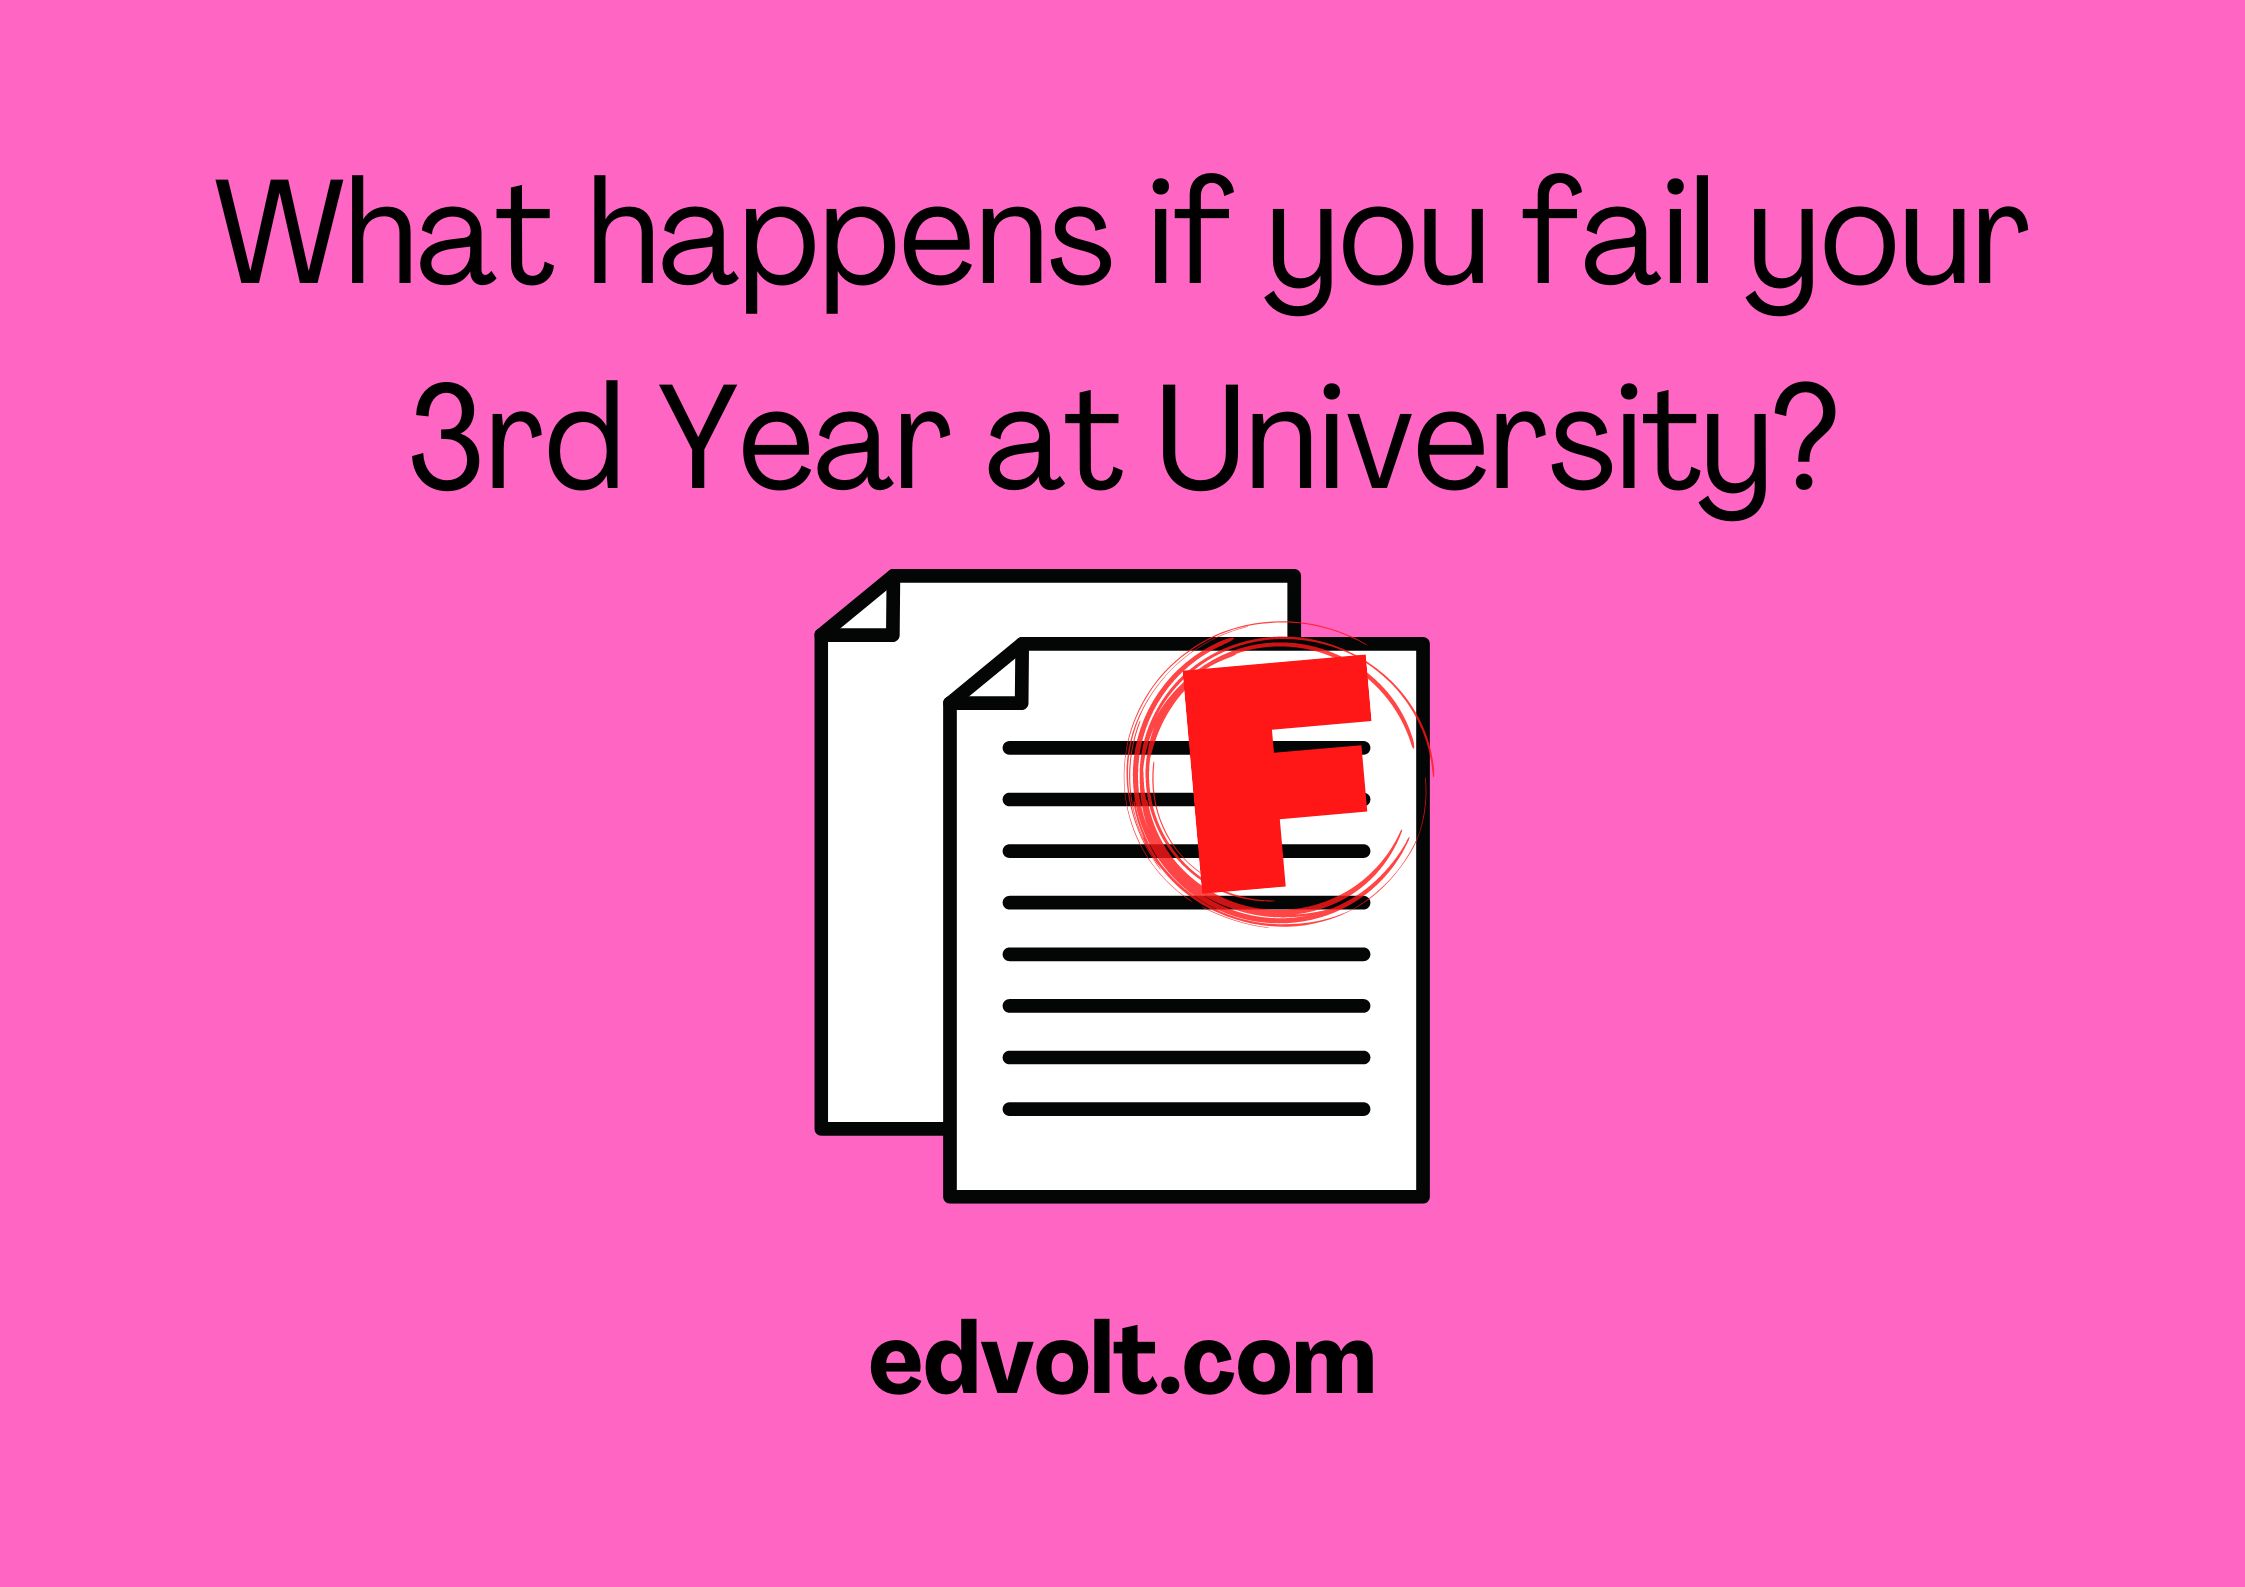 What happens if you fail your 3rd Year at University?